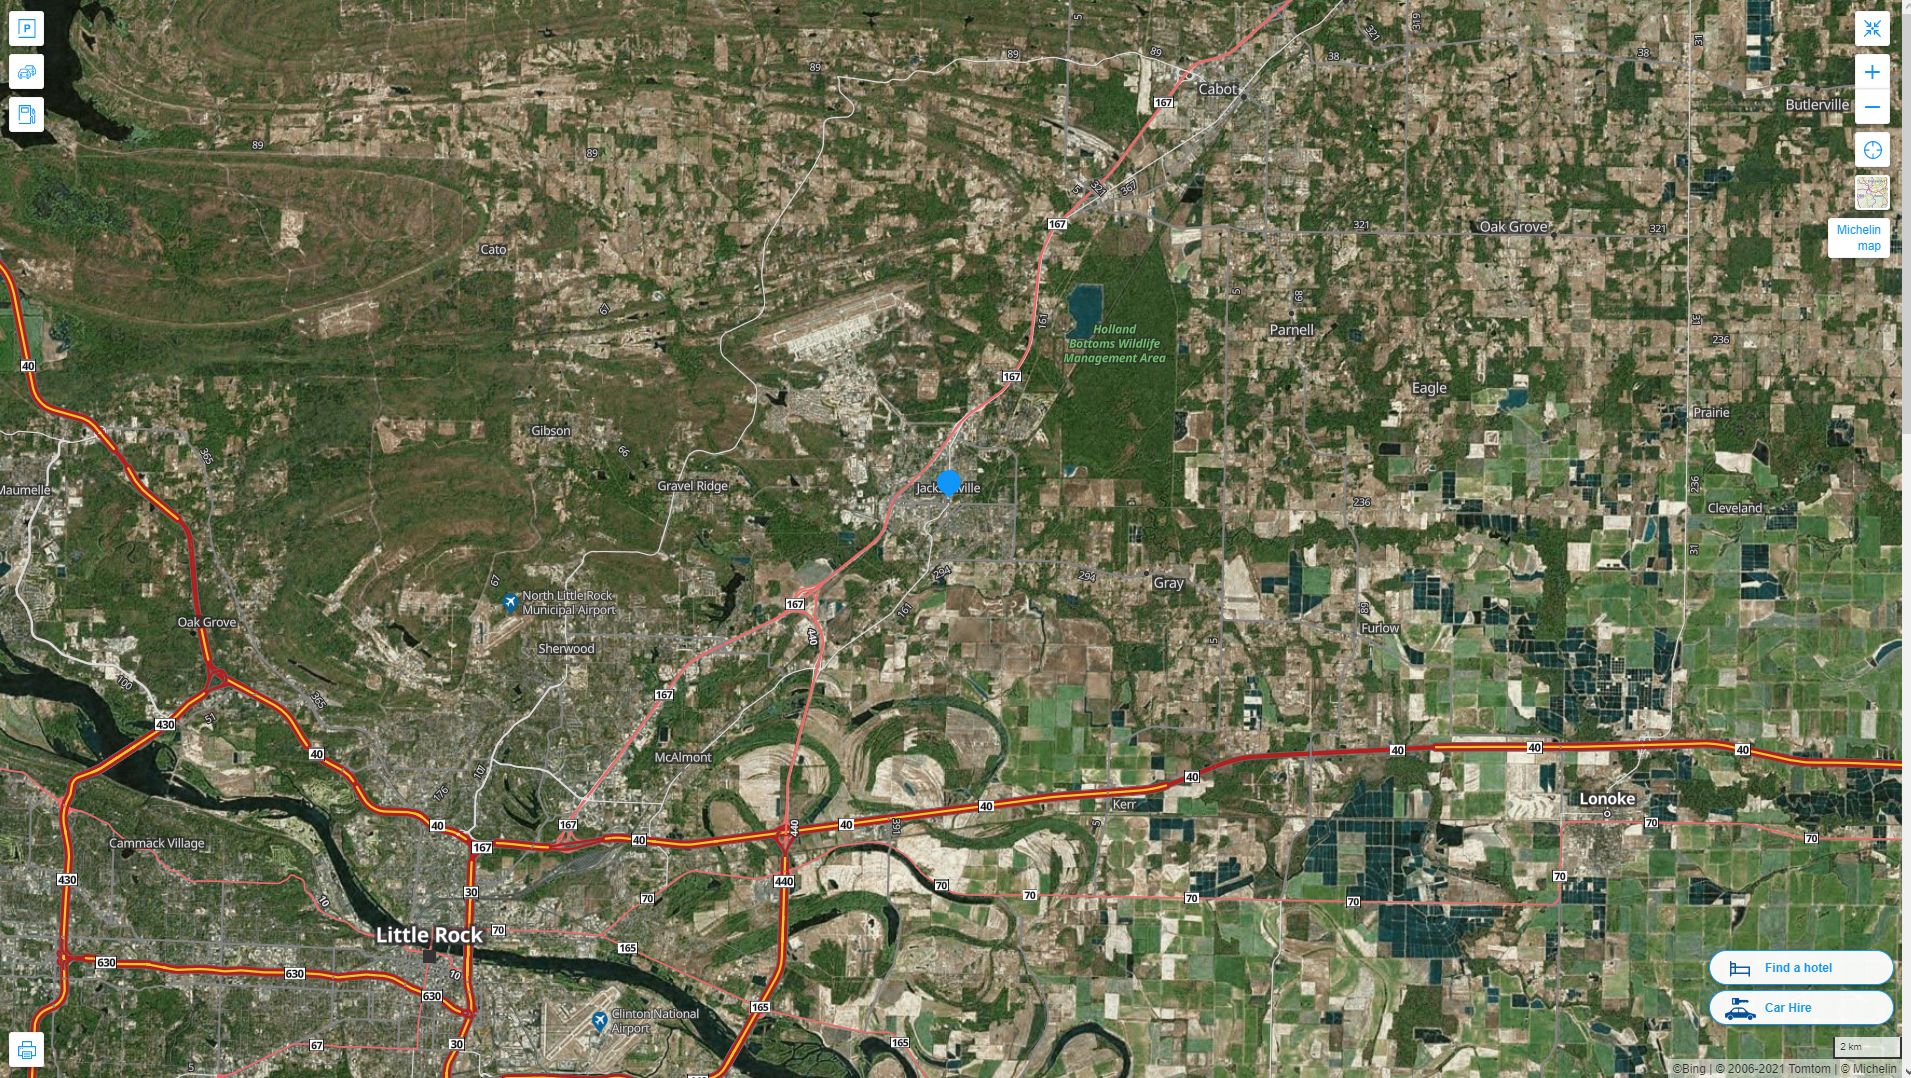 Jacksonville Arkansas Highway and Road Map with Satellite View